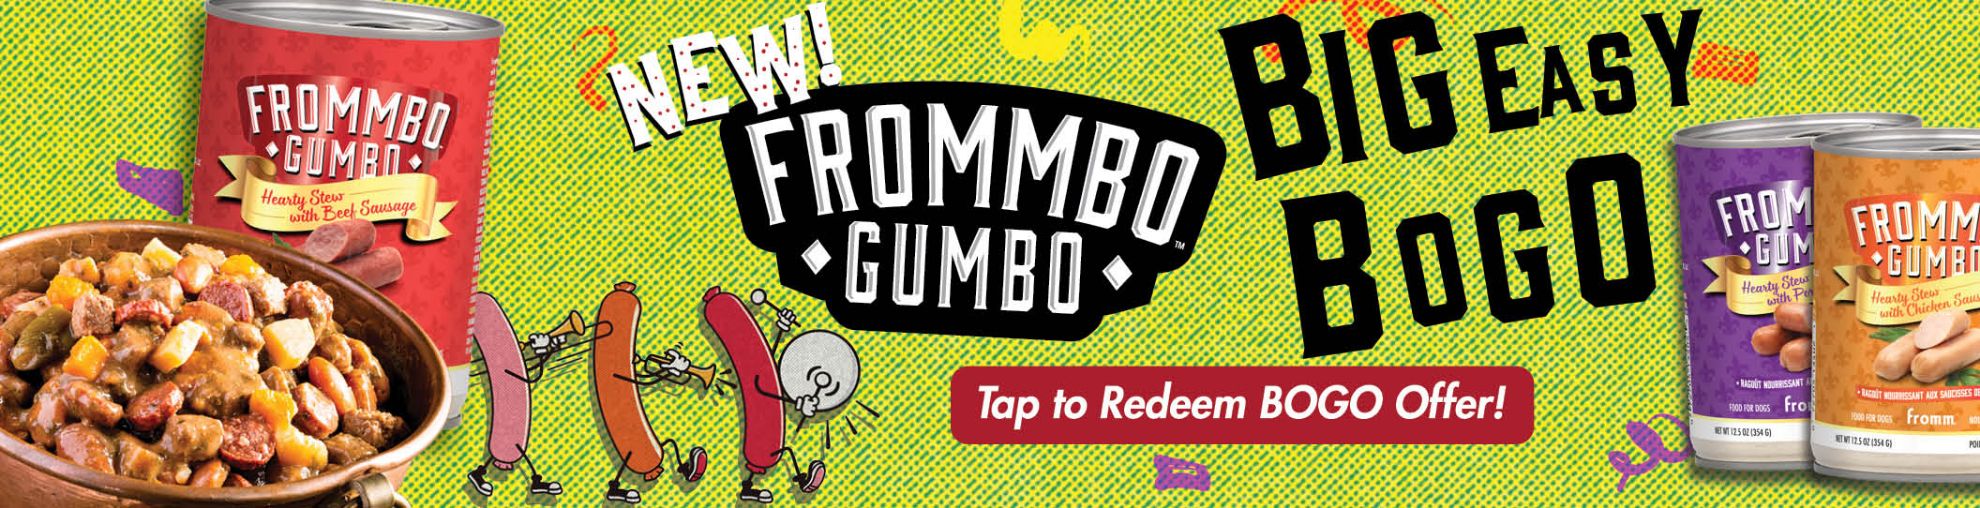 Big Easy BOGO Frommbo Gumbo and Frommbalaya Dog Cans